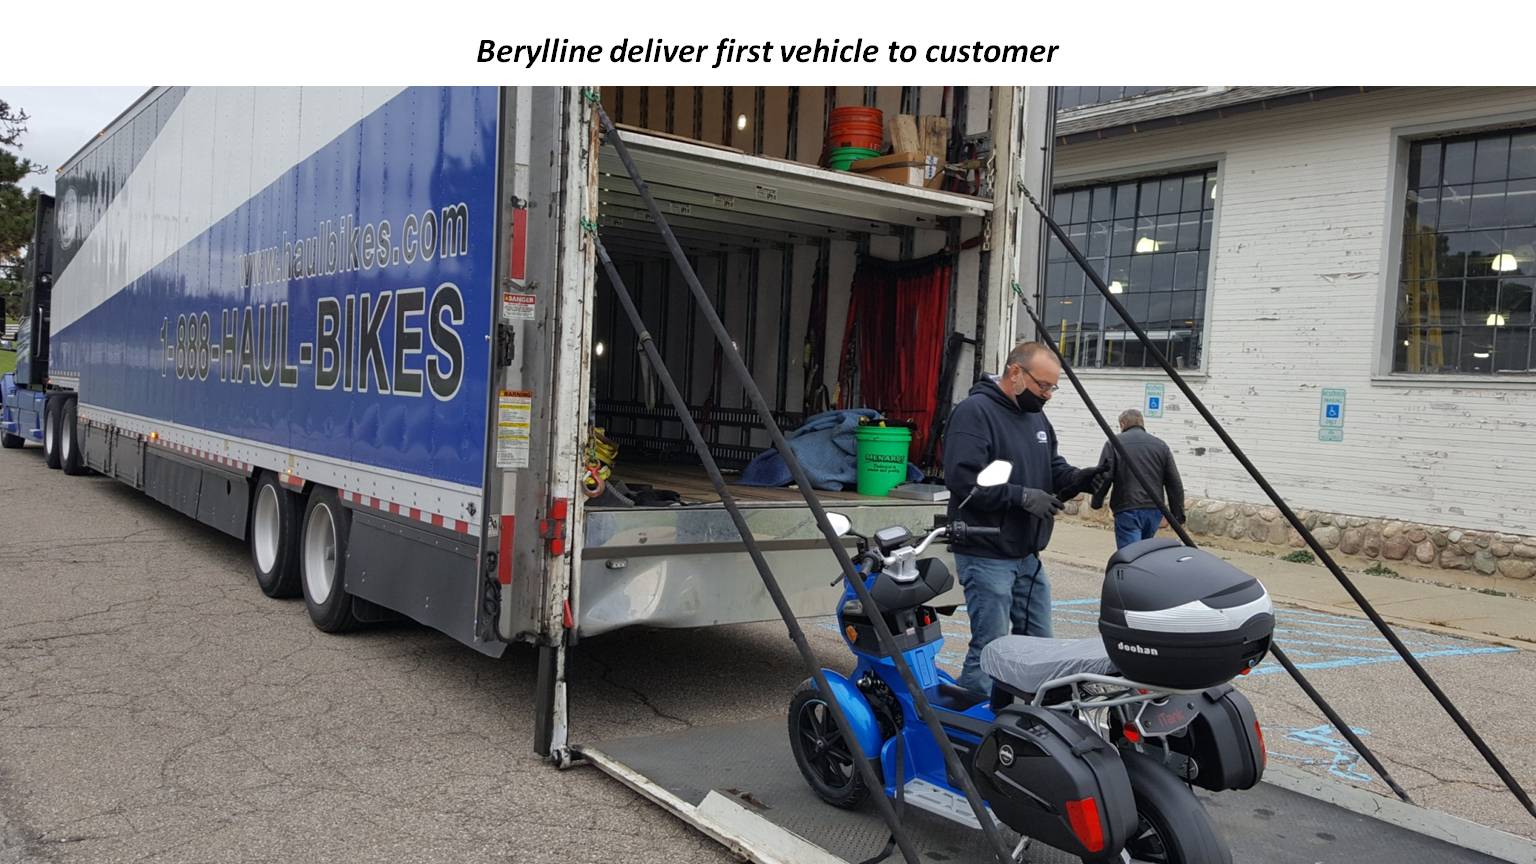 Berylline deliver first vehicle to customer